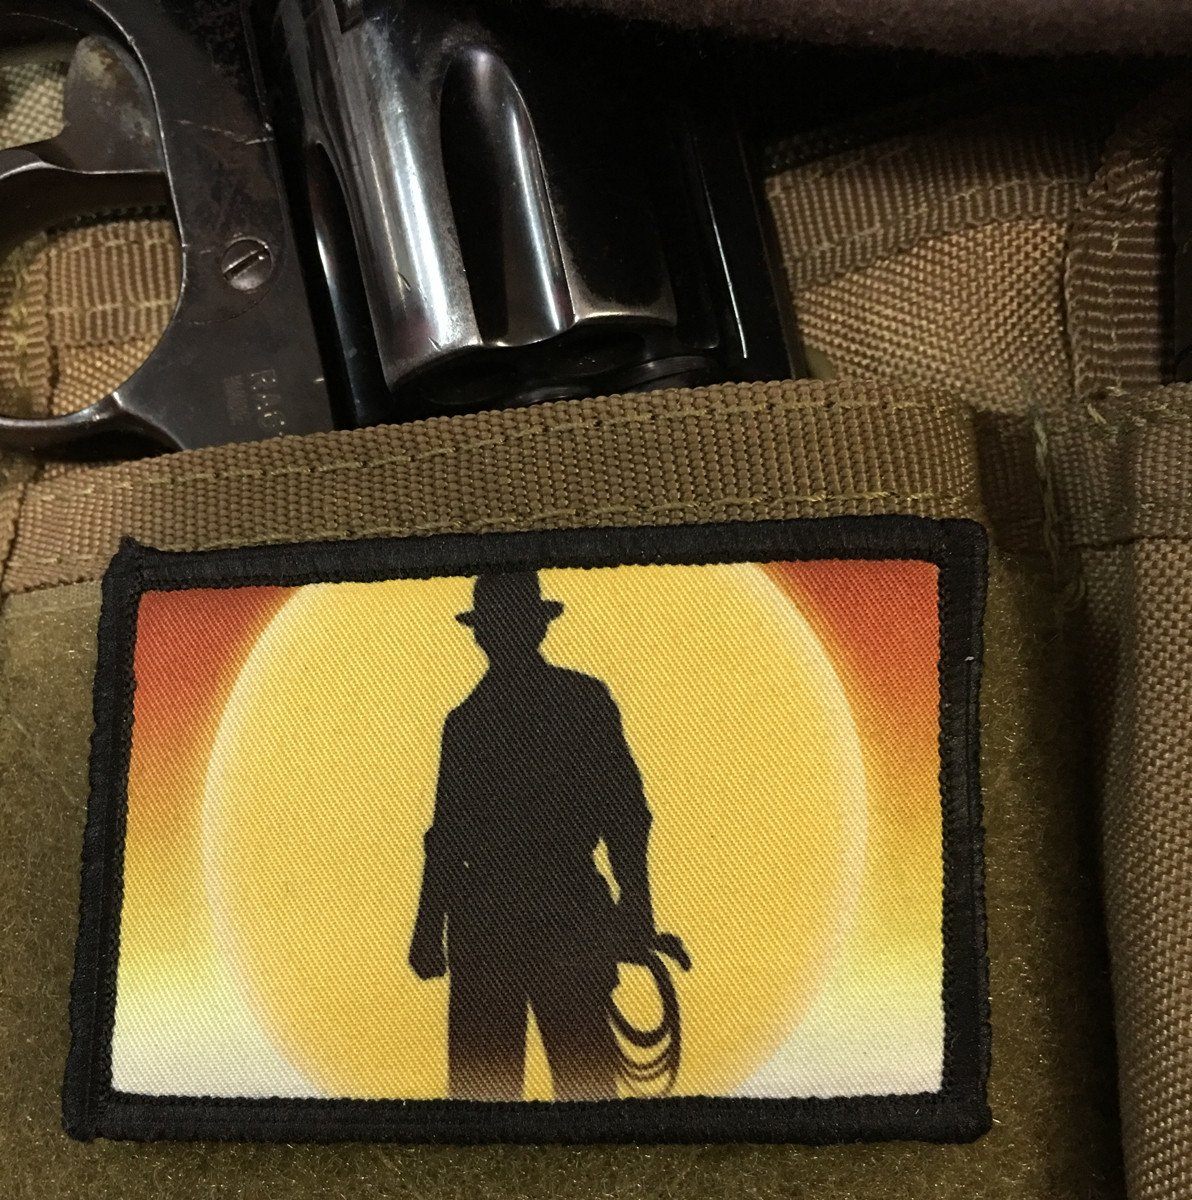 Patch featuring silhouette of iconic Indiana Jones with the sunset in the background. The patch in on a bag holding a revolver.